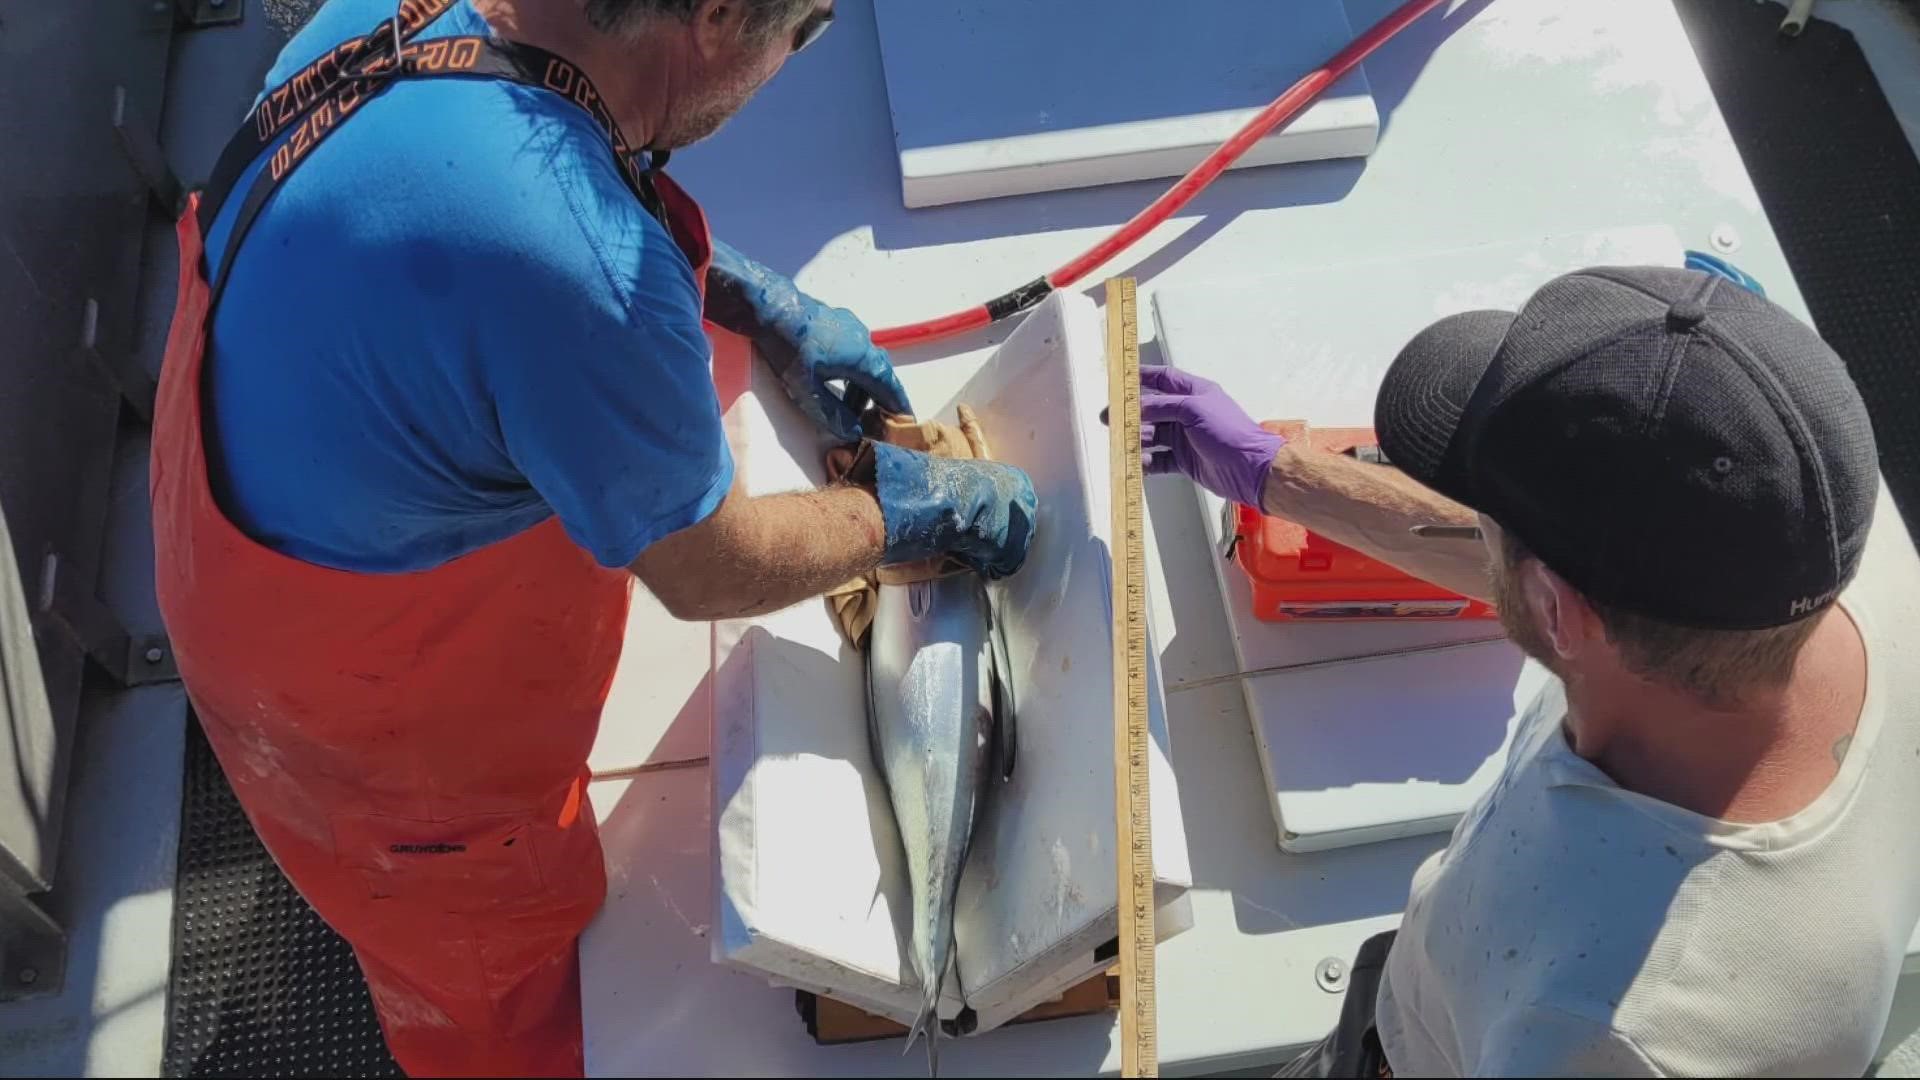 Fishermen off the Oregon coast are helping NOAA tag albacore tuna by surgically implanting antennae into the fish.